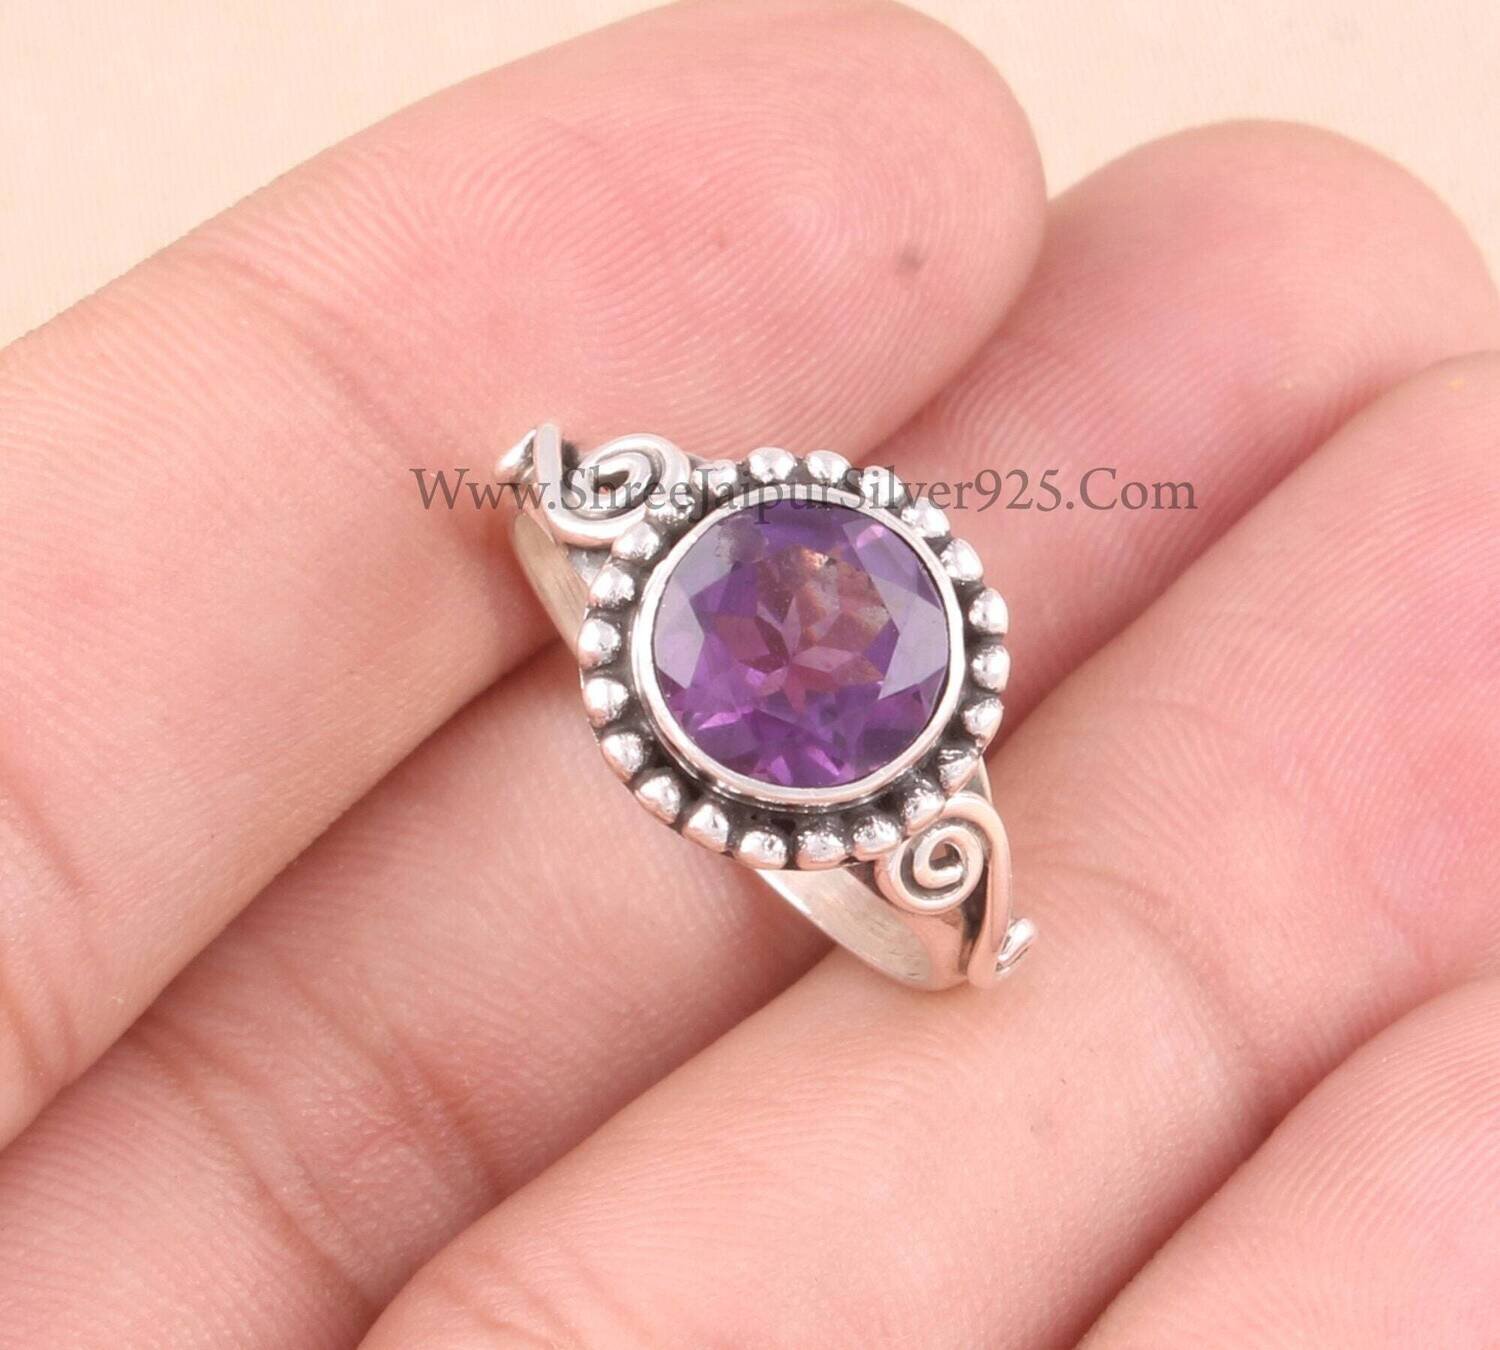 AAA Amethyst Round Cut Stone Solid 925 Sterling Silver Ring For Women, Handmade Silver Designer Ring For Wedding Anniversary Gifts Idea